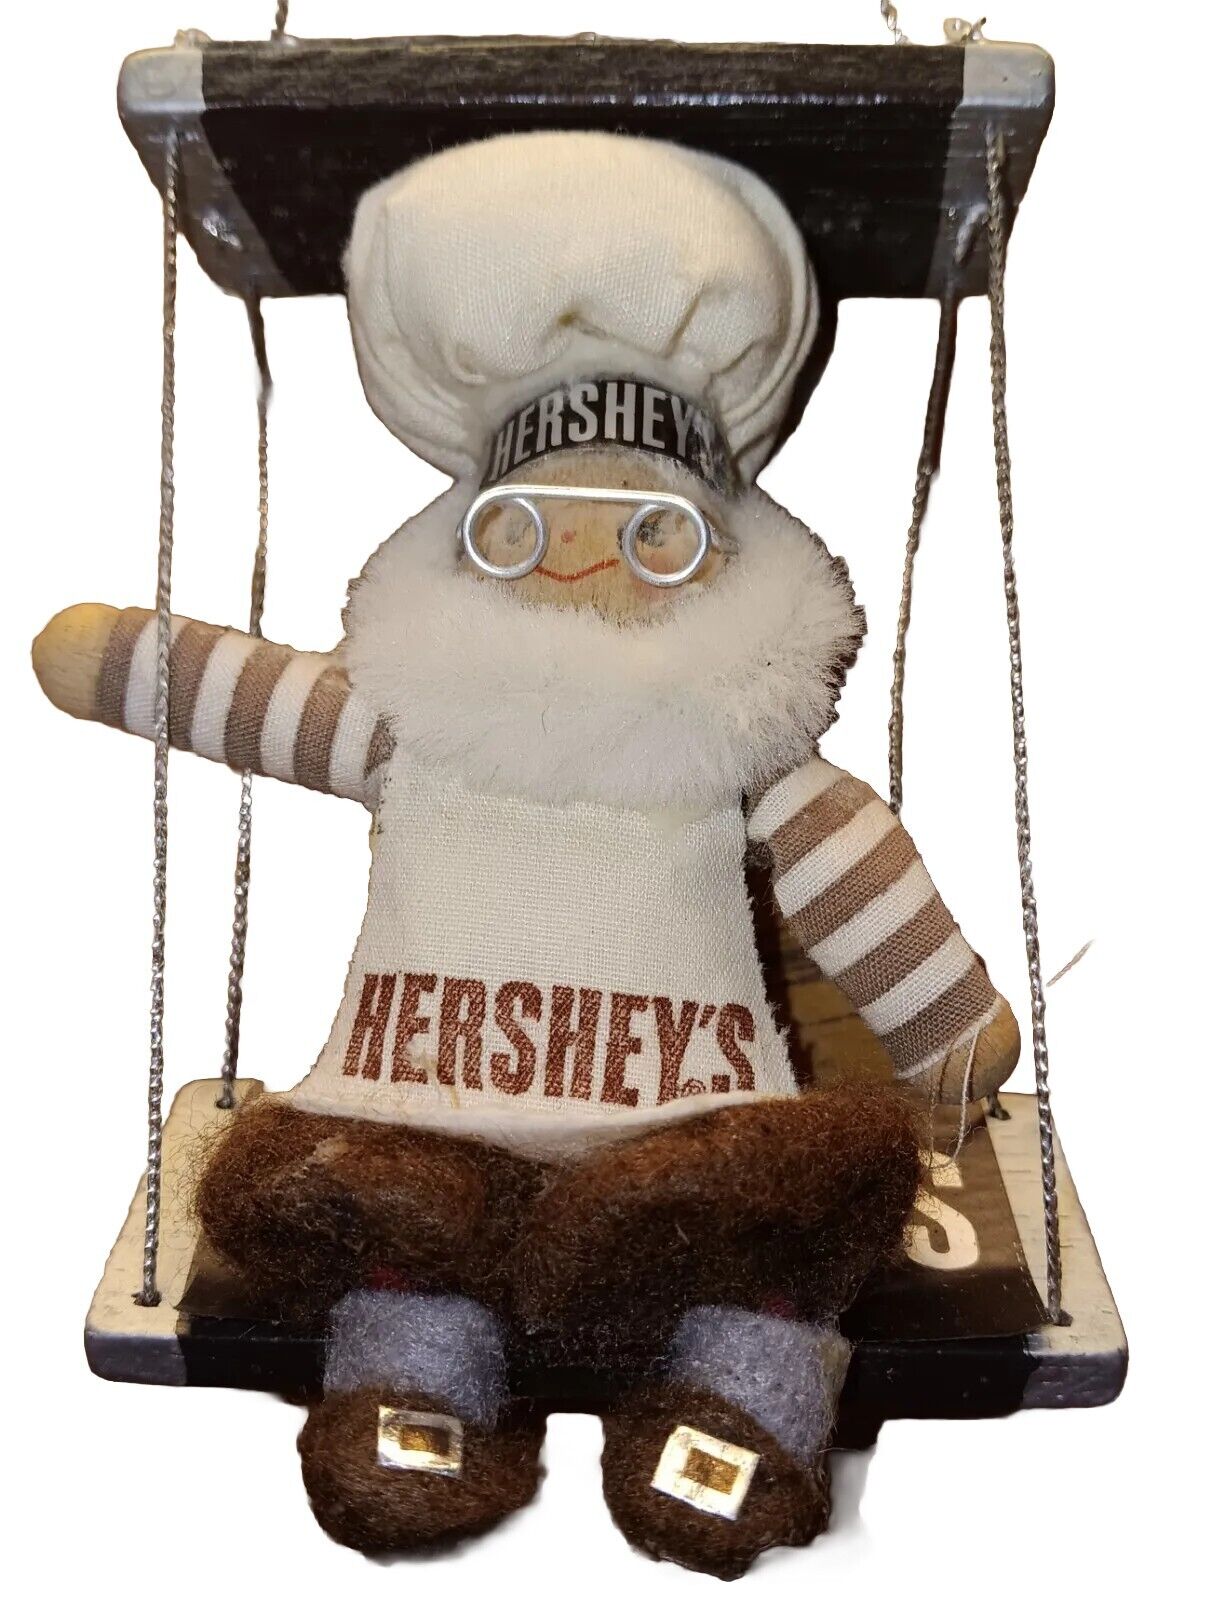 Hershey's Chocolate Vintage Collectible Decoration Christmas Ornament